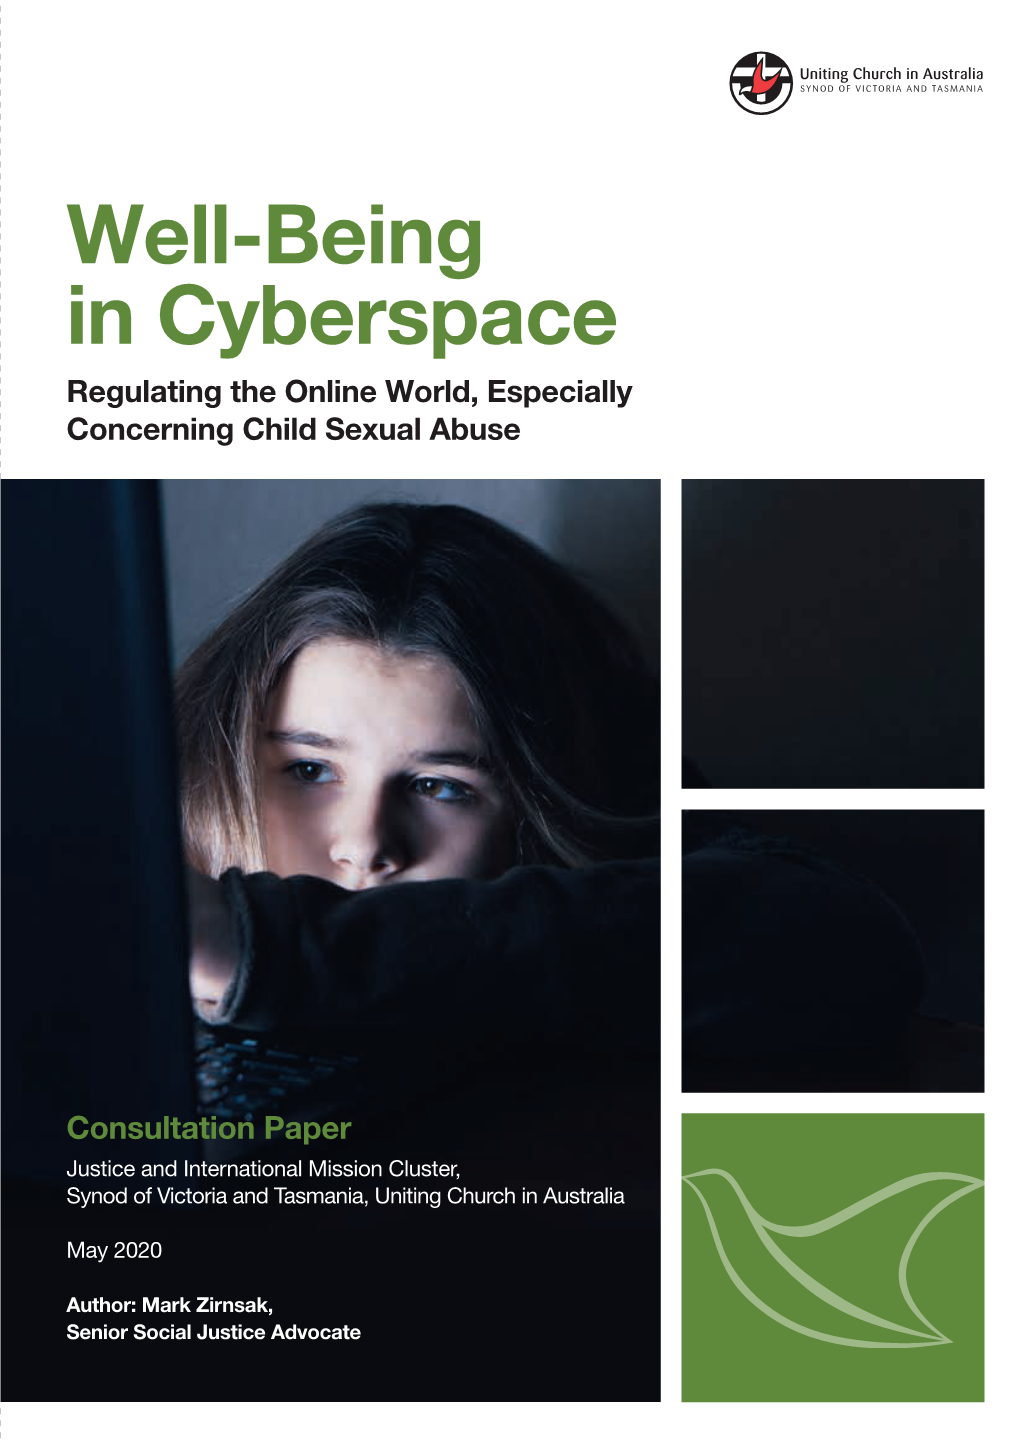 Well-Being in Cyberspace Regulating the Online World, Especially Concerning Child Sexual Abuse